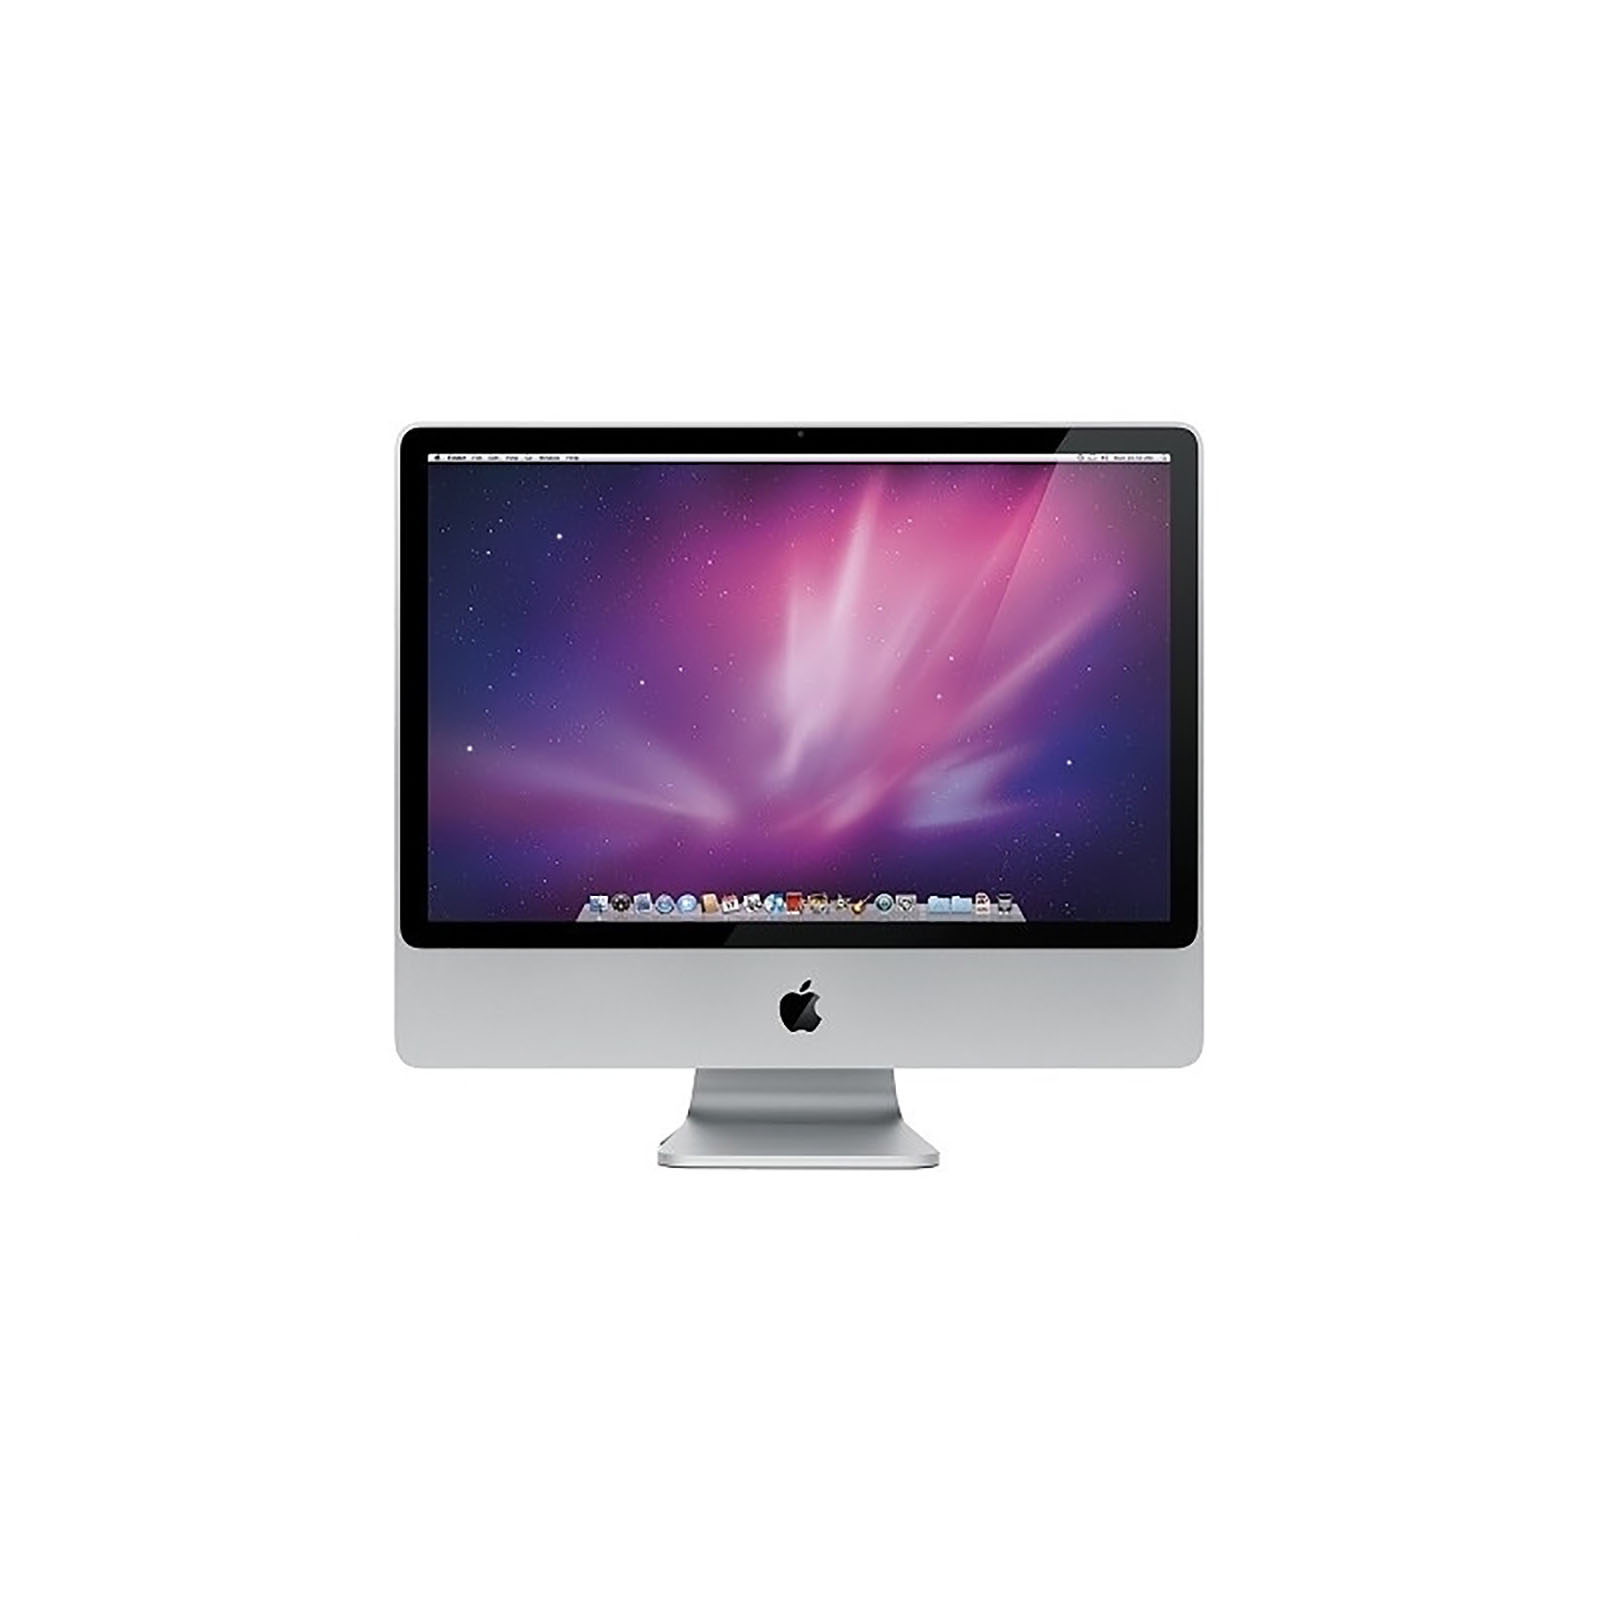 Apple 20" iMac with Intel Core 2 Duo 2.4GHz Processor